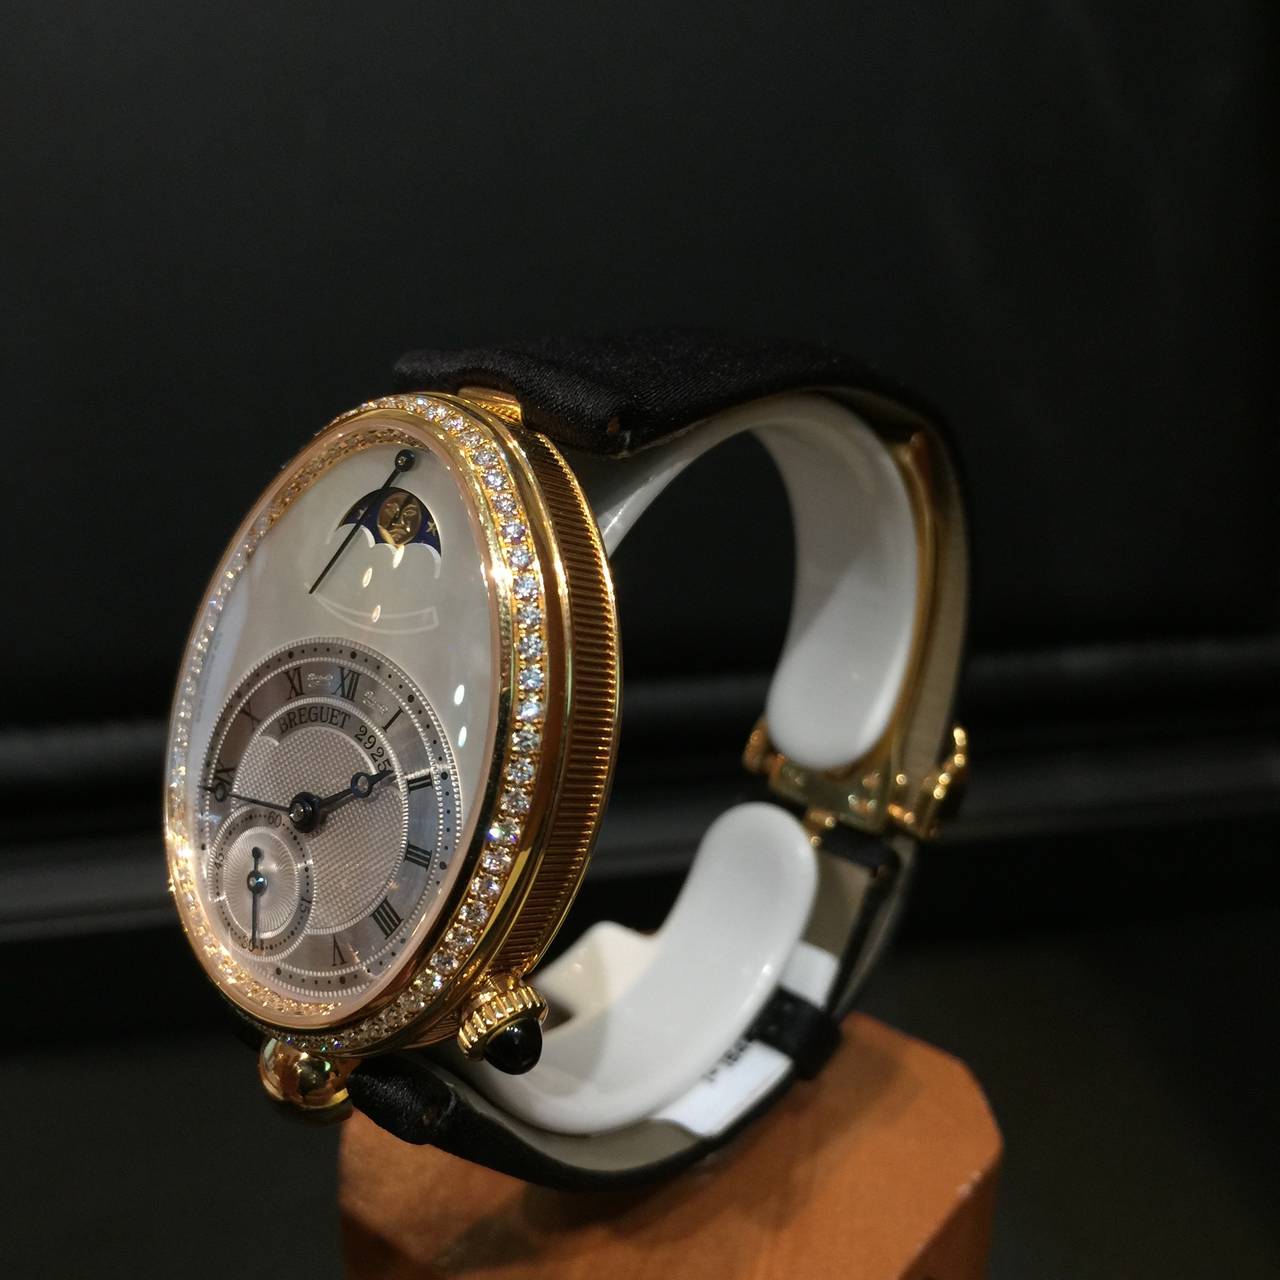 Breguet Reine de Naples in 18K Yellow Gold. This beautiful Reine de Naples ladies timepiece features a white Mother of Pearl Dial with 18K YG Case Set with Approximately .83ctw Round Pave Style Set Diamonds.

Self Winding Movement with Small